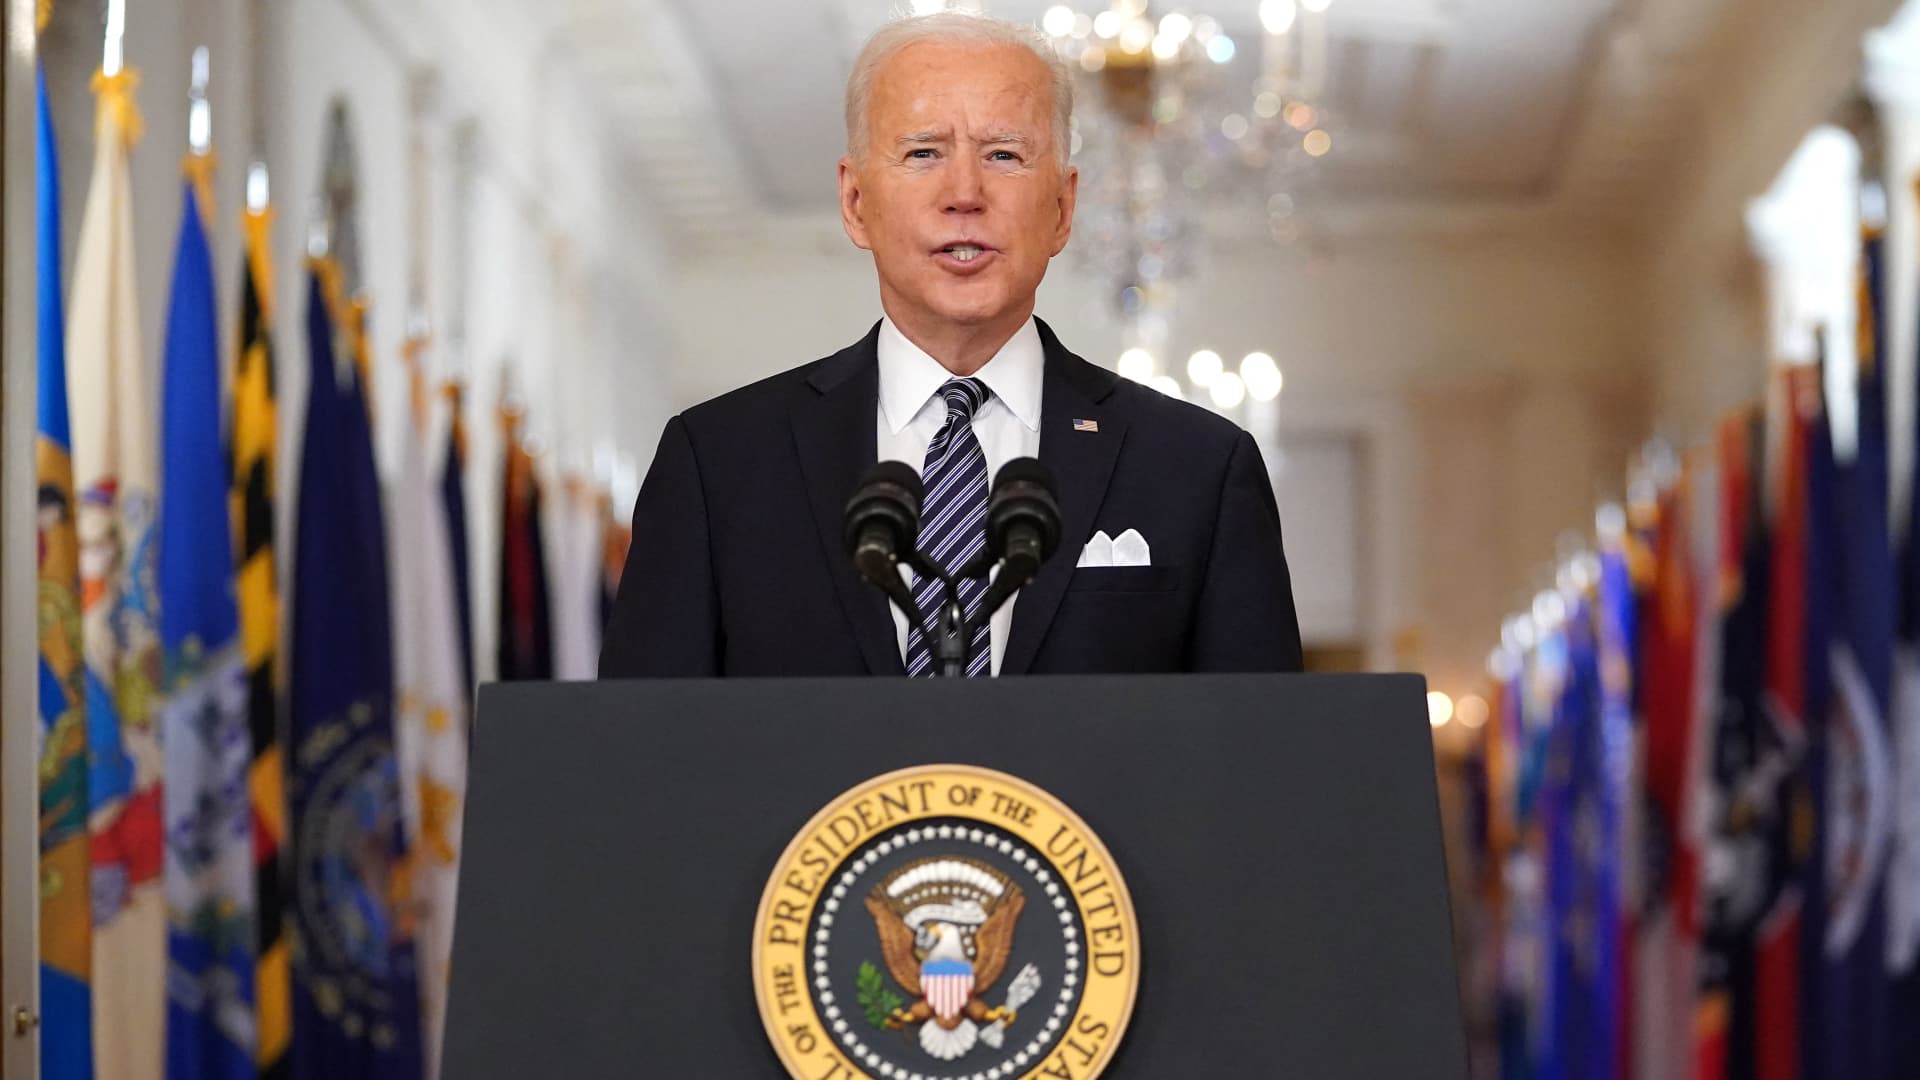 US President Joe Biden speaks on the anniversary of the start of the Covid-19 pandemic, in the East Room of the White House in Washington, DC on March 11, 2021.